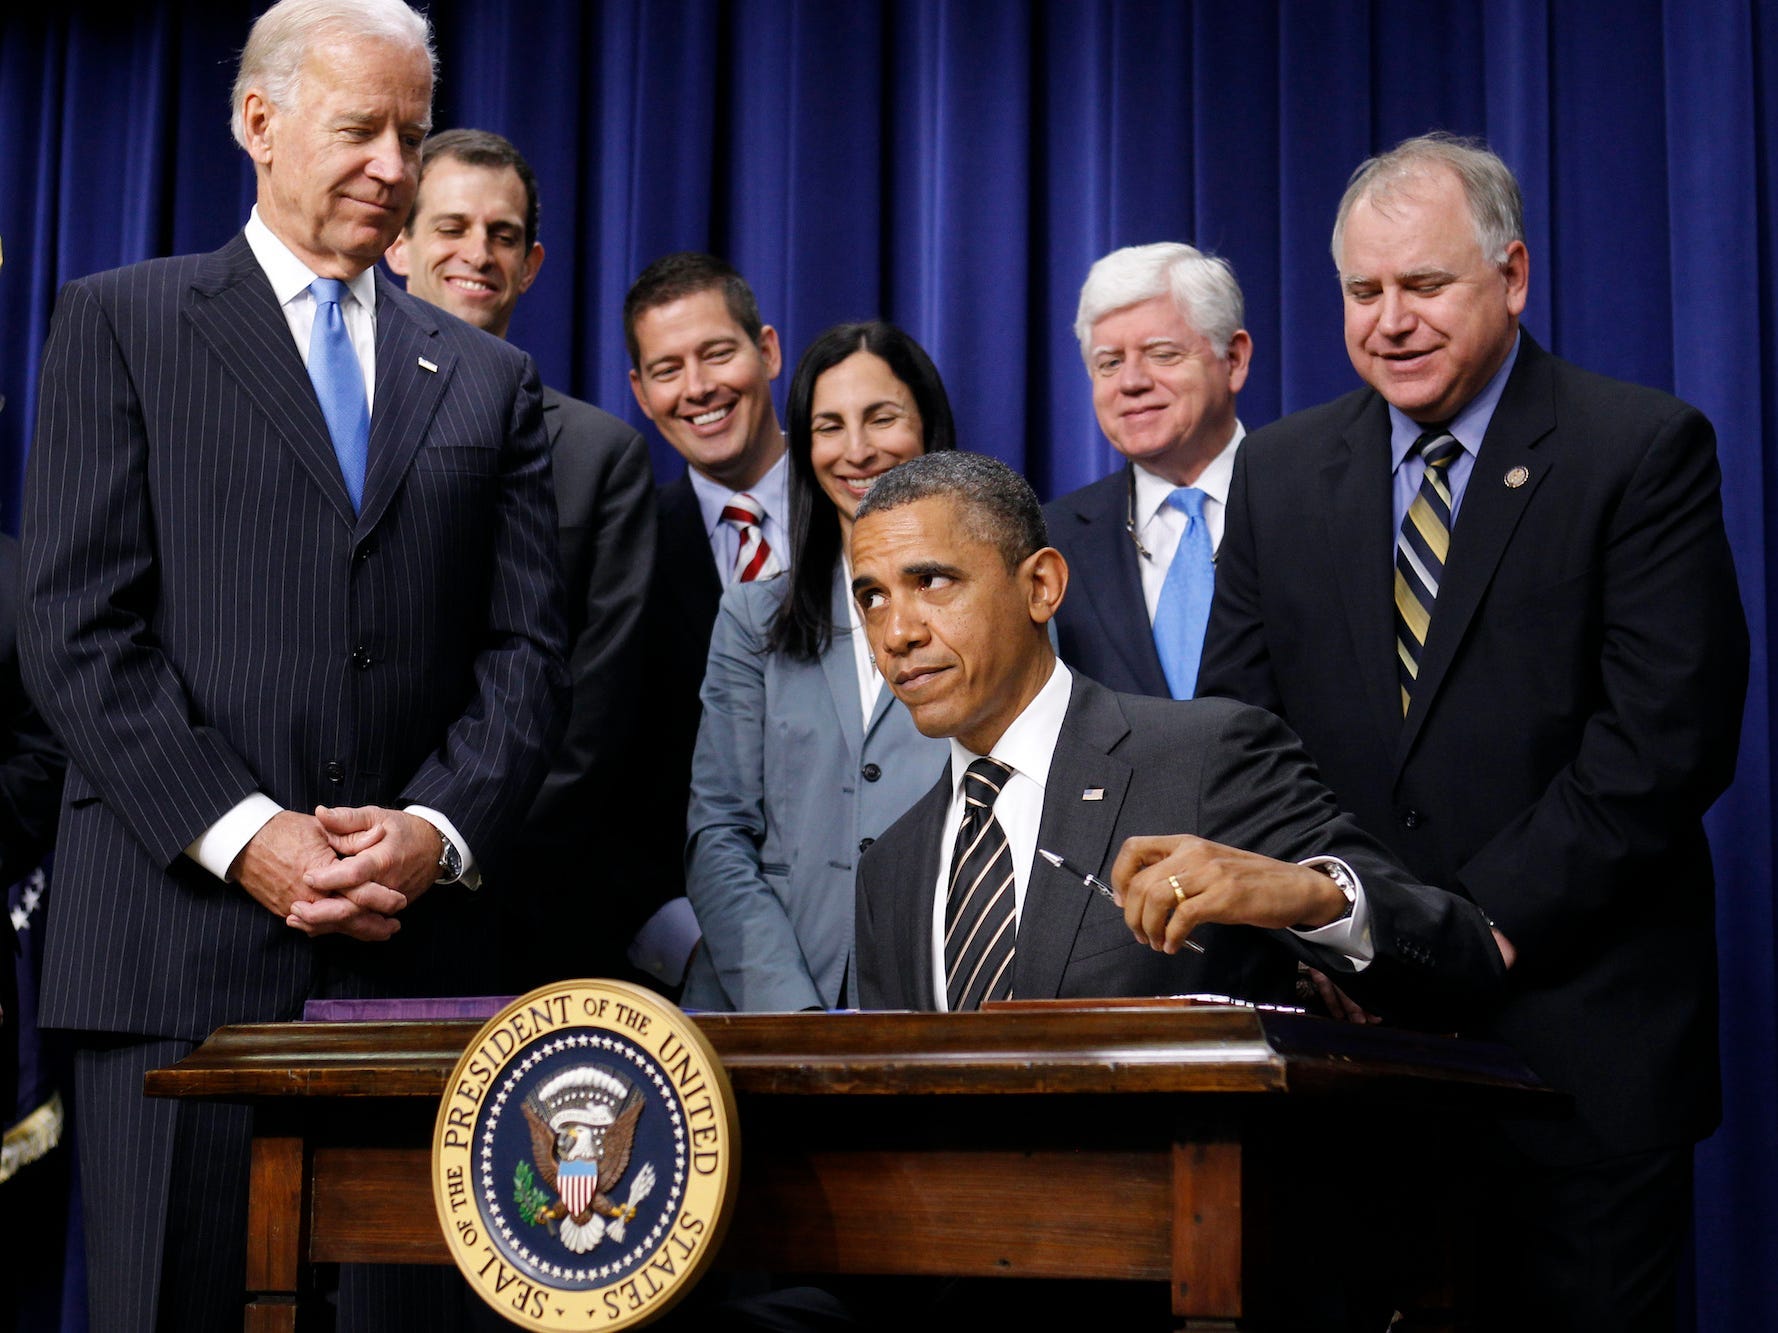 President Barack Obama, joined by Vice President Joe Biden and lawmakers, signs the Stop Trading on Congressional Knowledge (STOCK) Act, Wednesday, April 4, 2012, in the Eisenhower Executive Office Building on the White House complex in Washington.